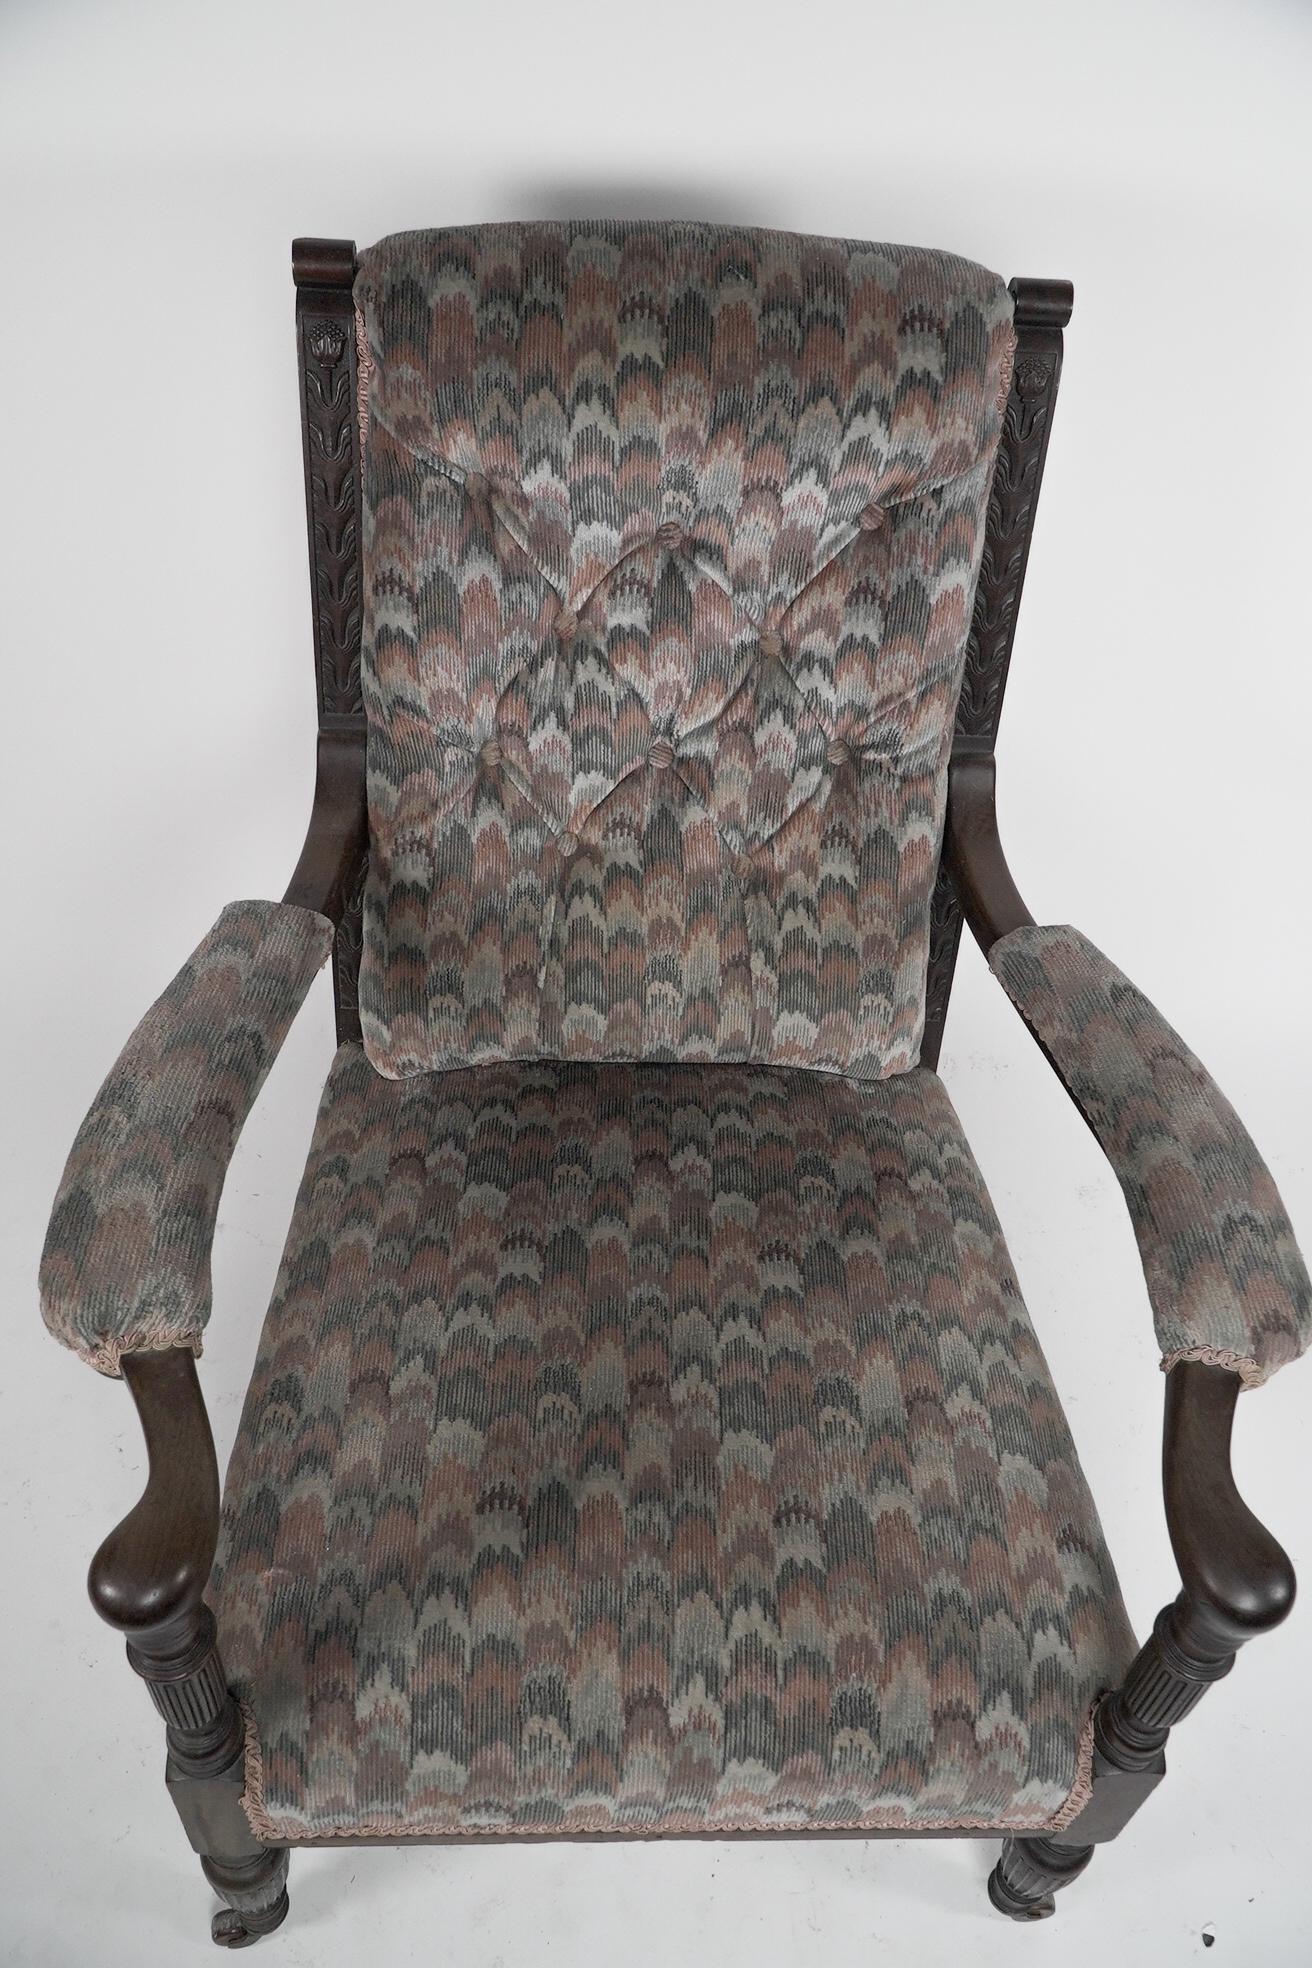 Hand-Carved H W Batley attri, Jas Shoolbred An Aesthetic Movement Mahogany Armchair For Sale